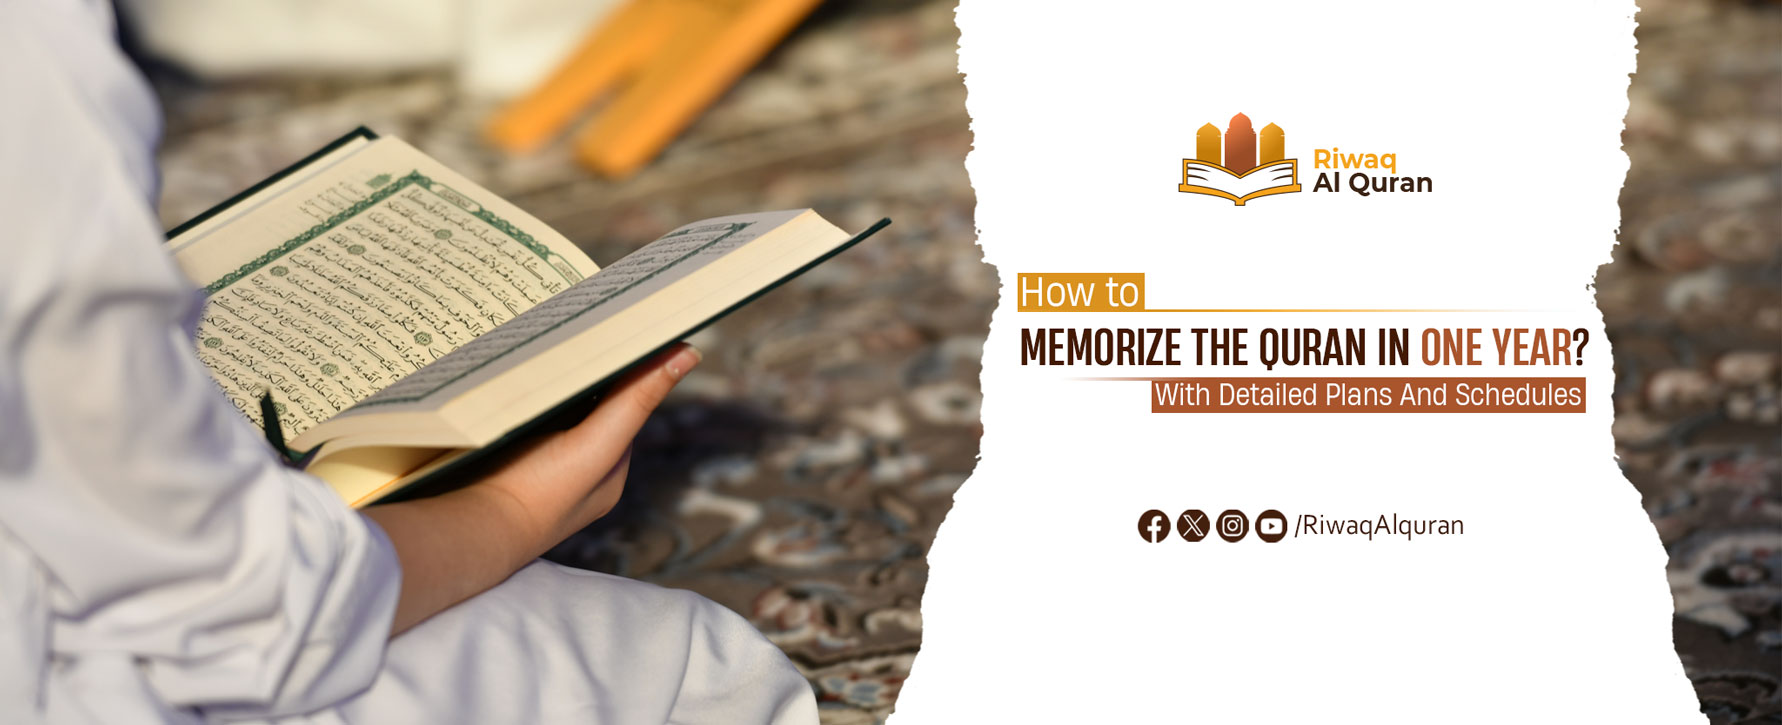 how to do hifz in one year - Memorize The Quran In 1 Year